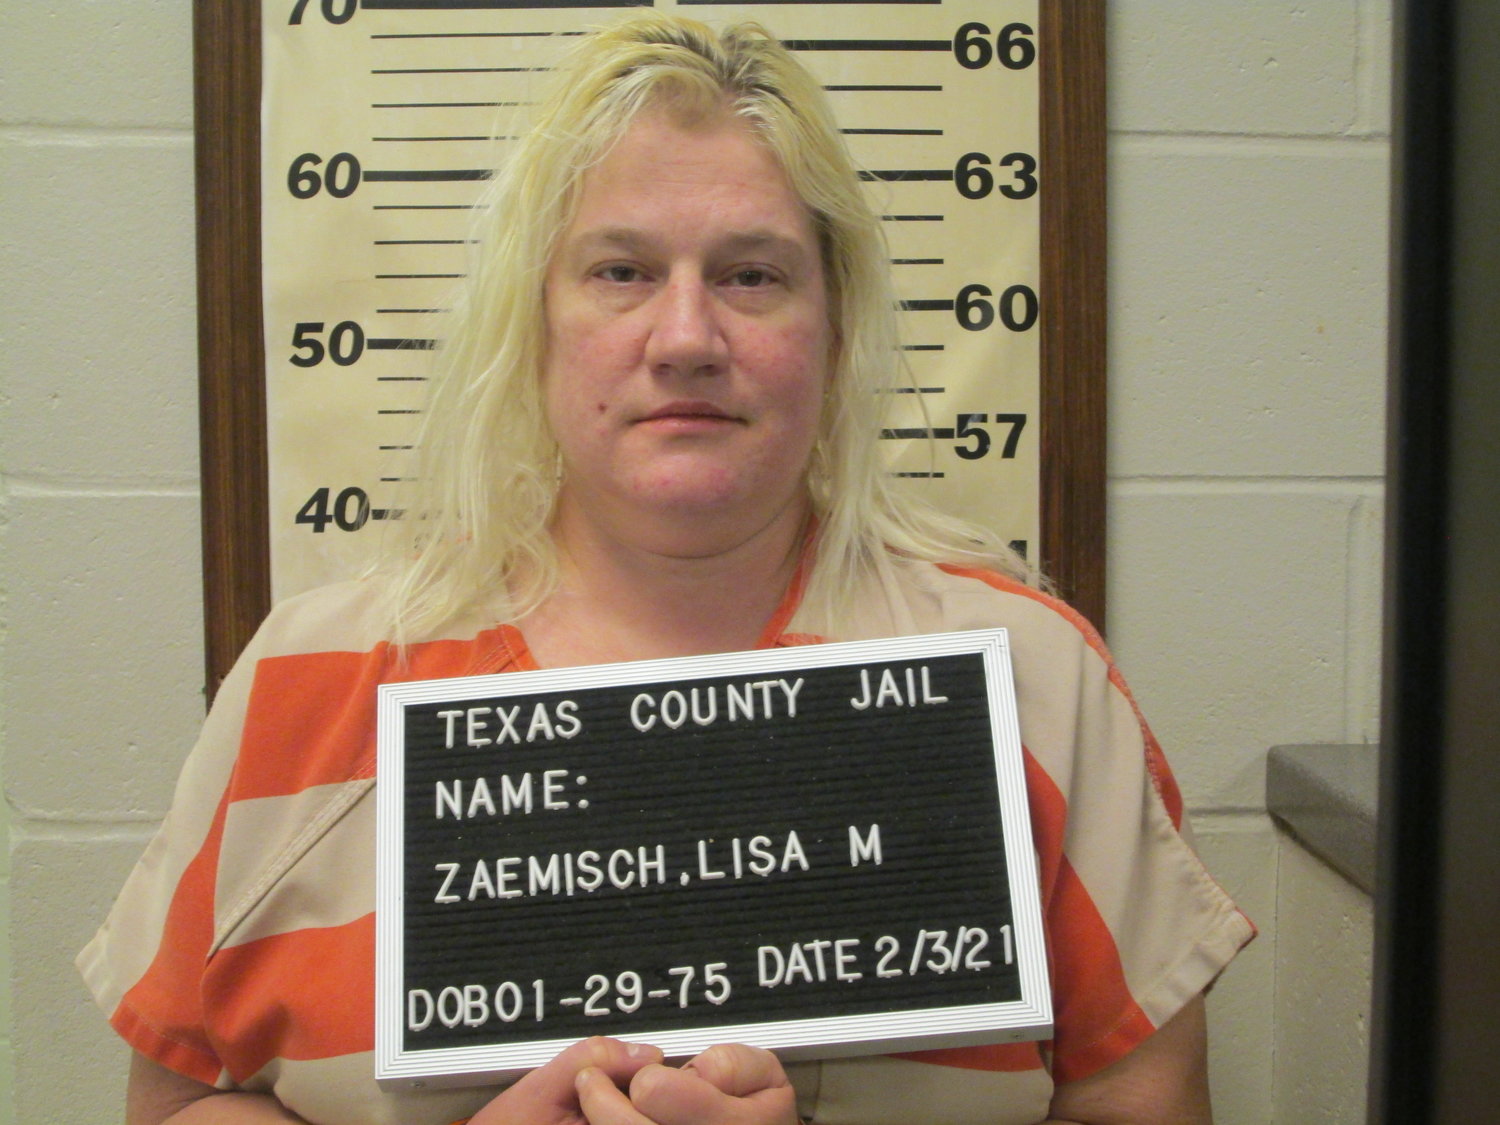 Lisa Zaemisch after being booked in Texas County Jail for an assault involving what was described as a “battle ax